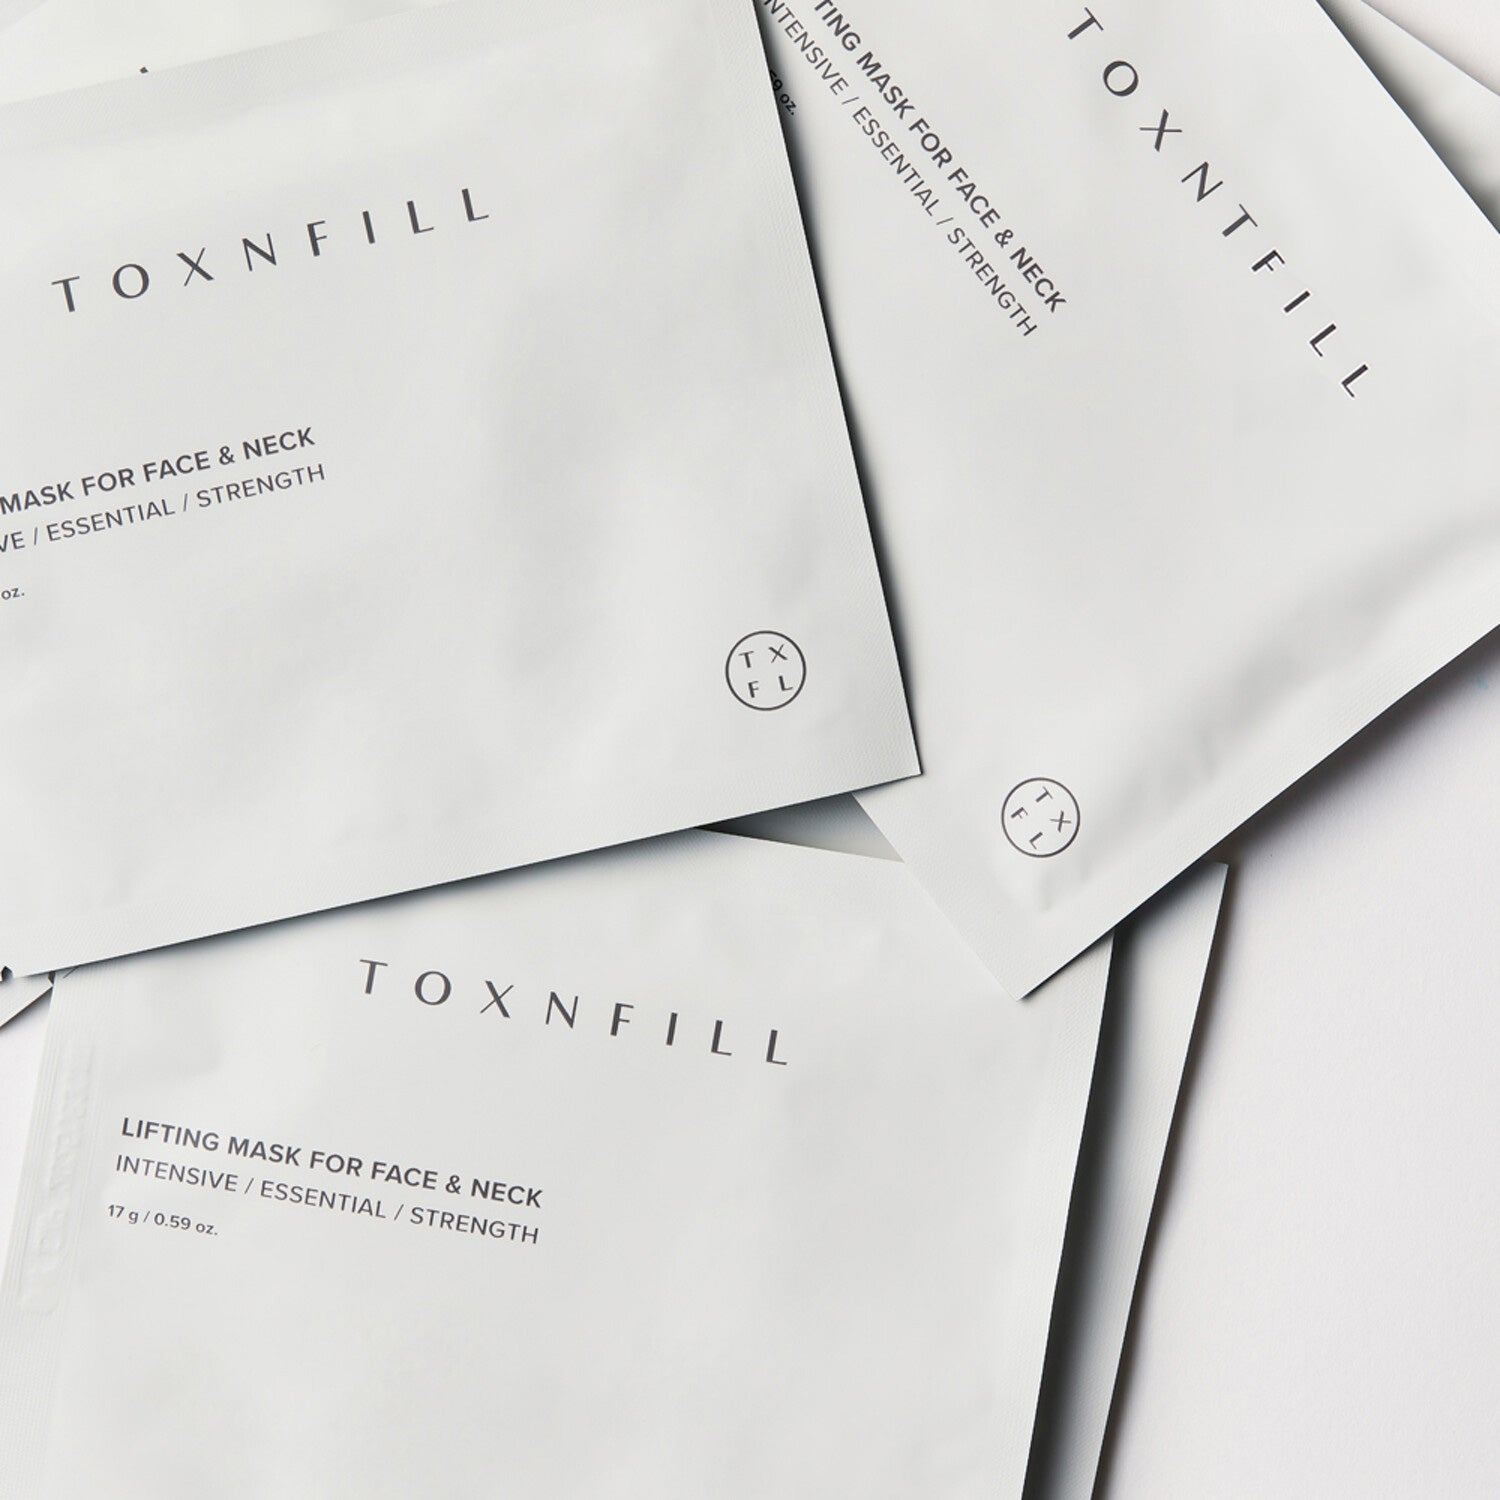 Toxnfill Lifting Mask For Face & Neck 17g